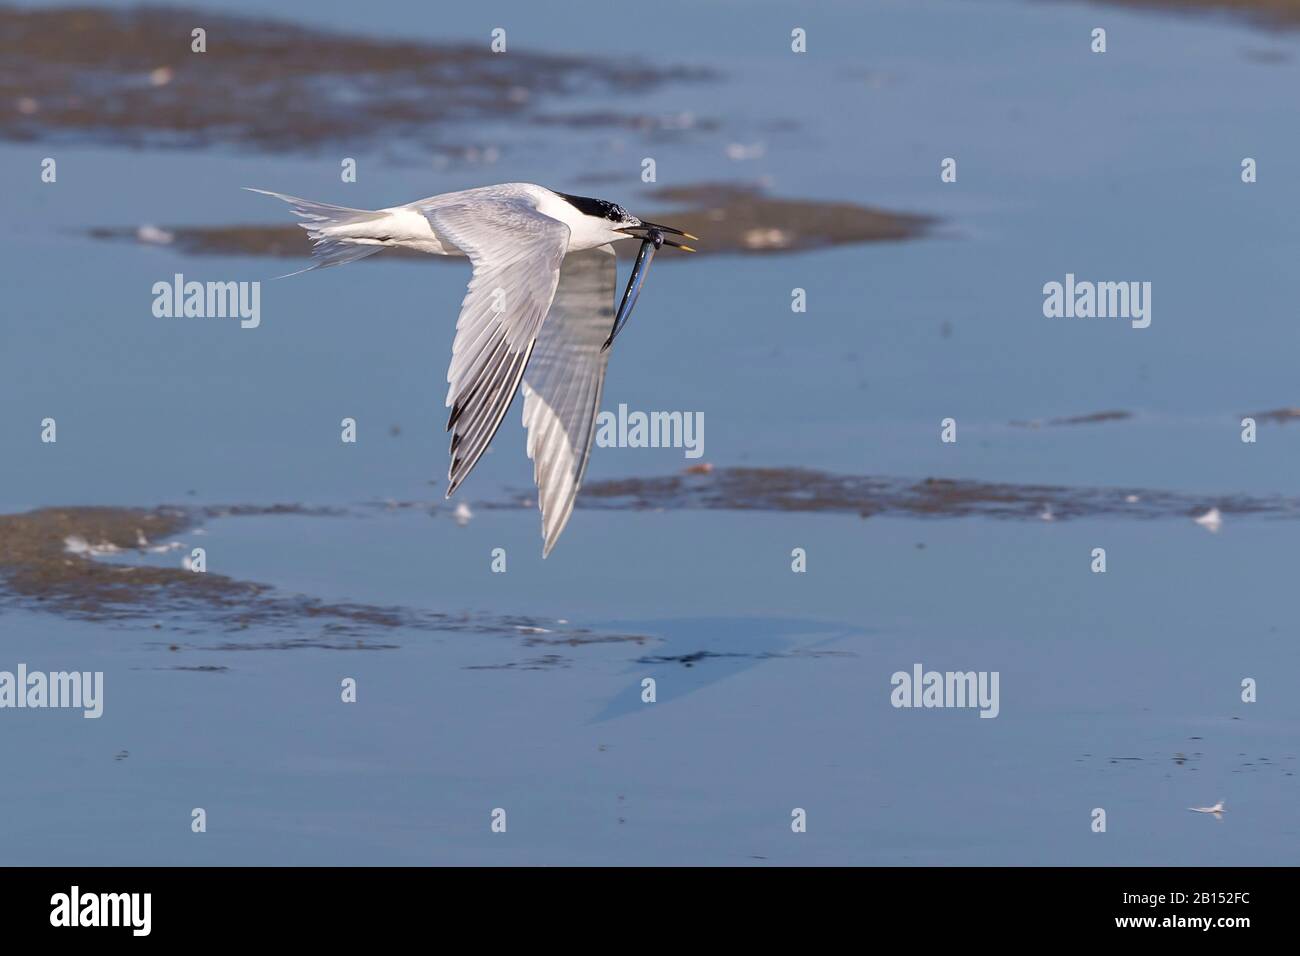 sandwich tern (Sterna sandvicensis, Thalasseus sandvicensis), in flight over water with caught fish in the beak, Netherlands, Texel Stock Photo